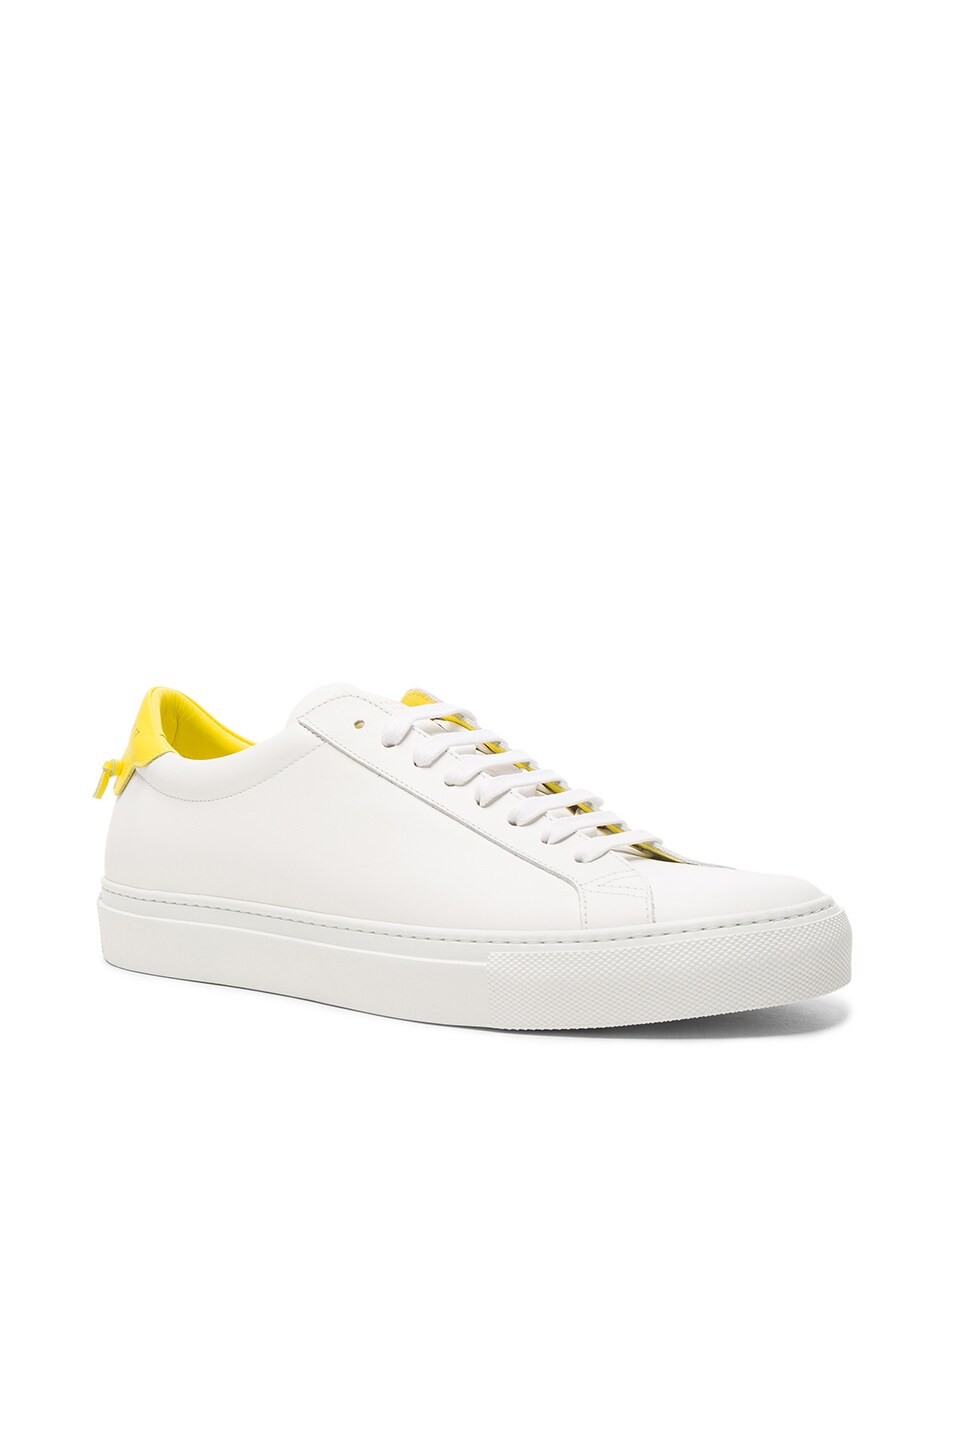 Image 1 of Givenchy Urban Street Low Top Leather Sneakers in White & Yellow